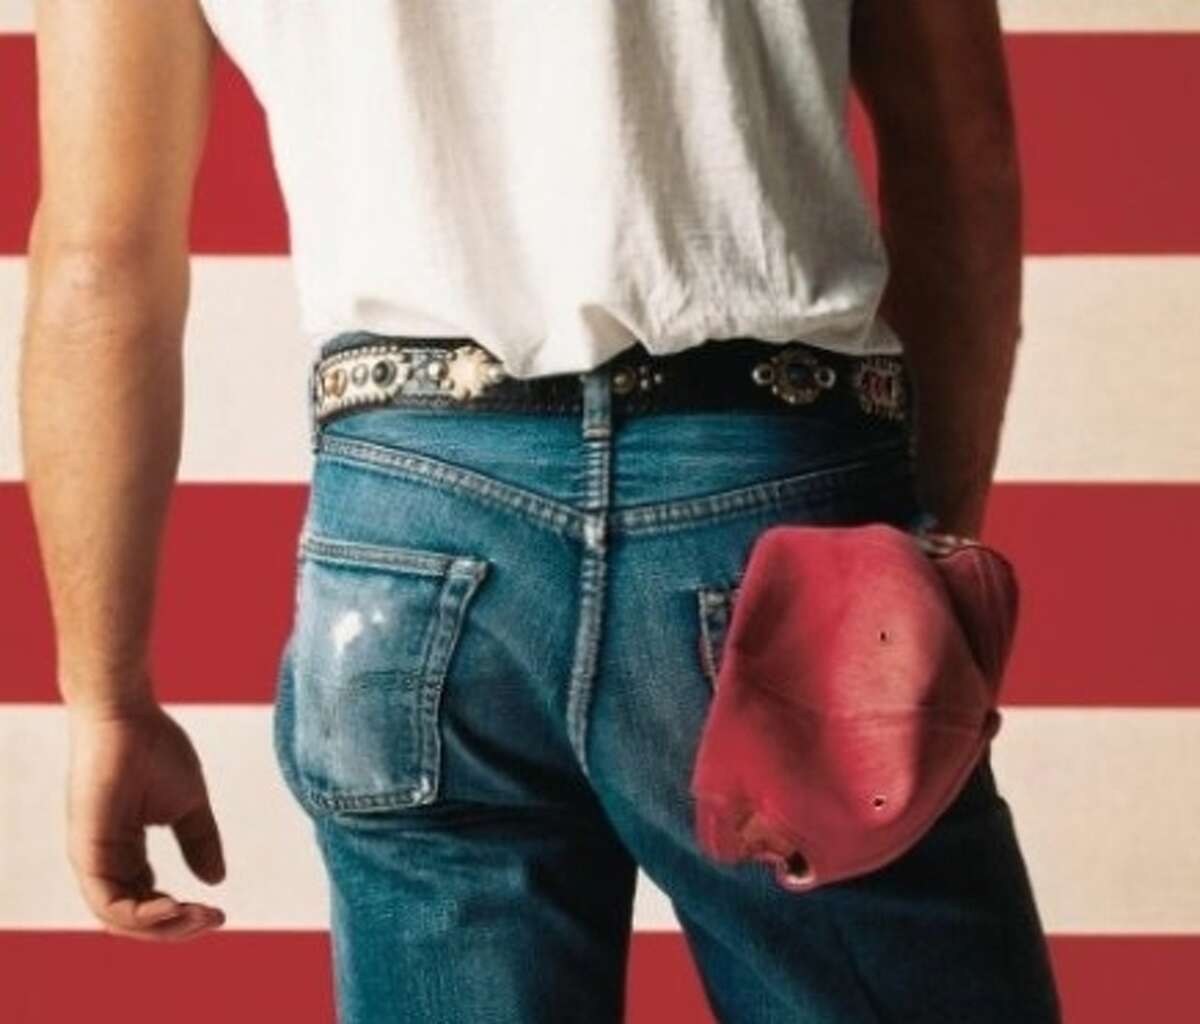 Bruce Springsteen’s “Born in the U.S.A.”